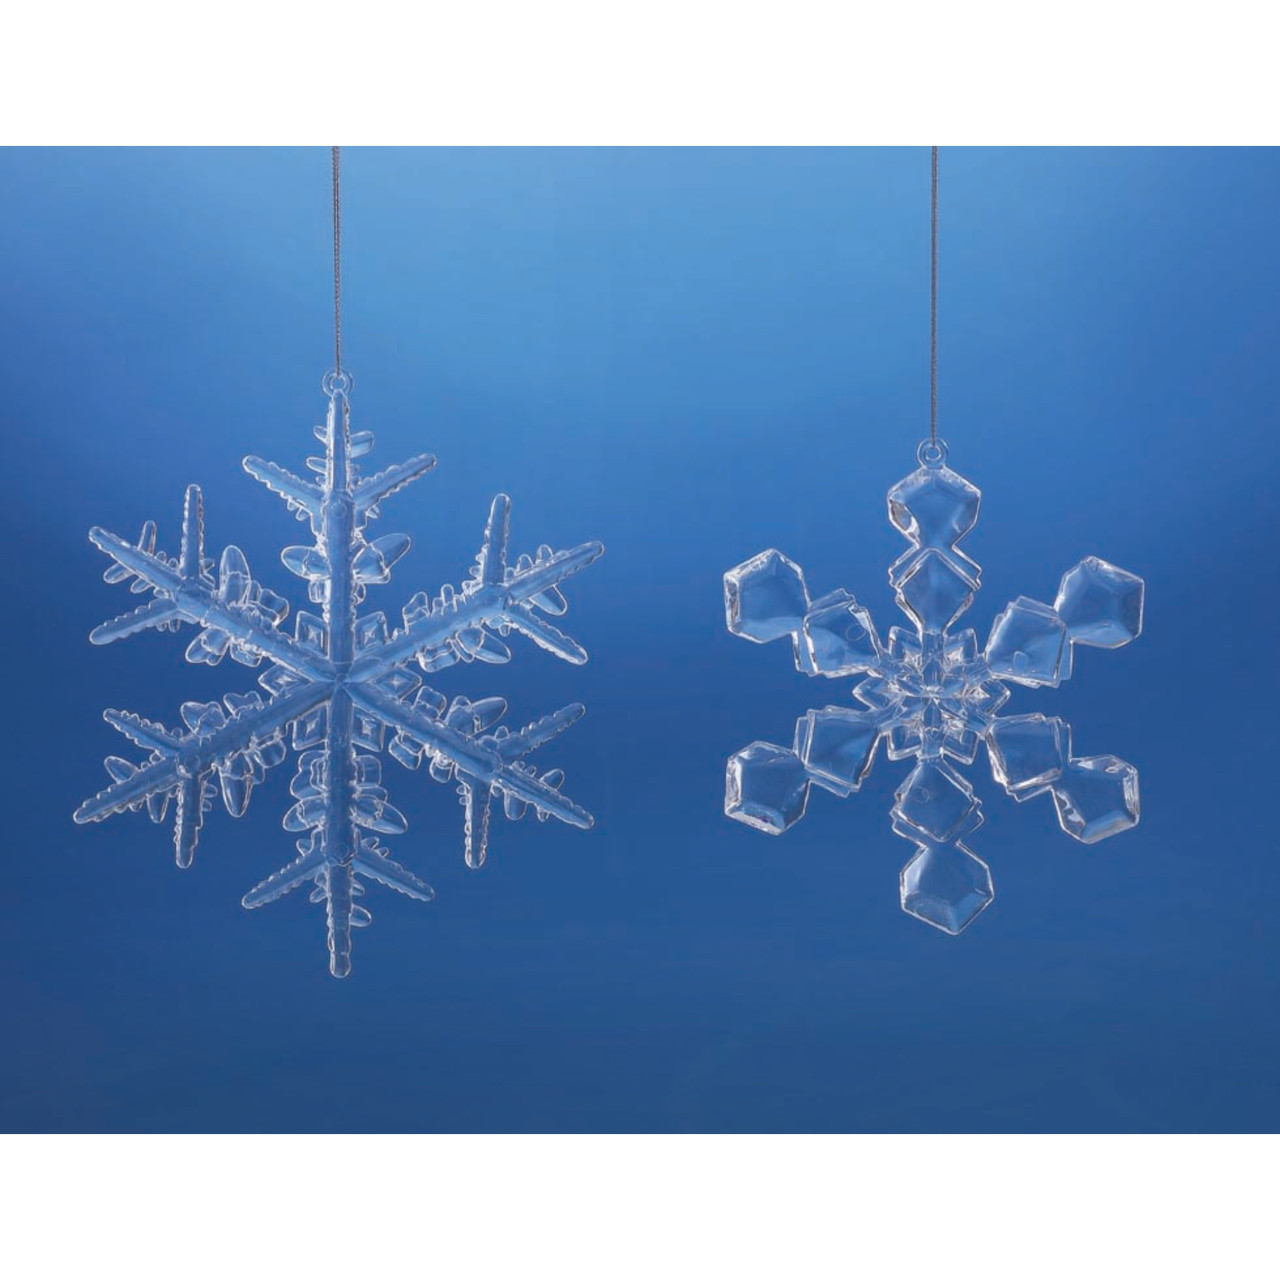 12ct Clear Faceted Snowflake Ornaments 6.5